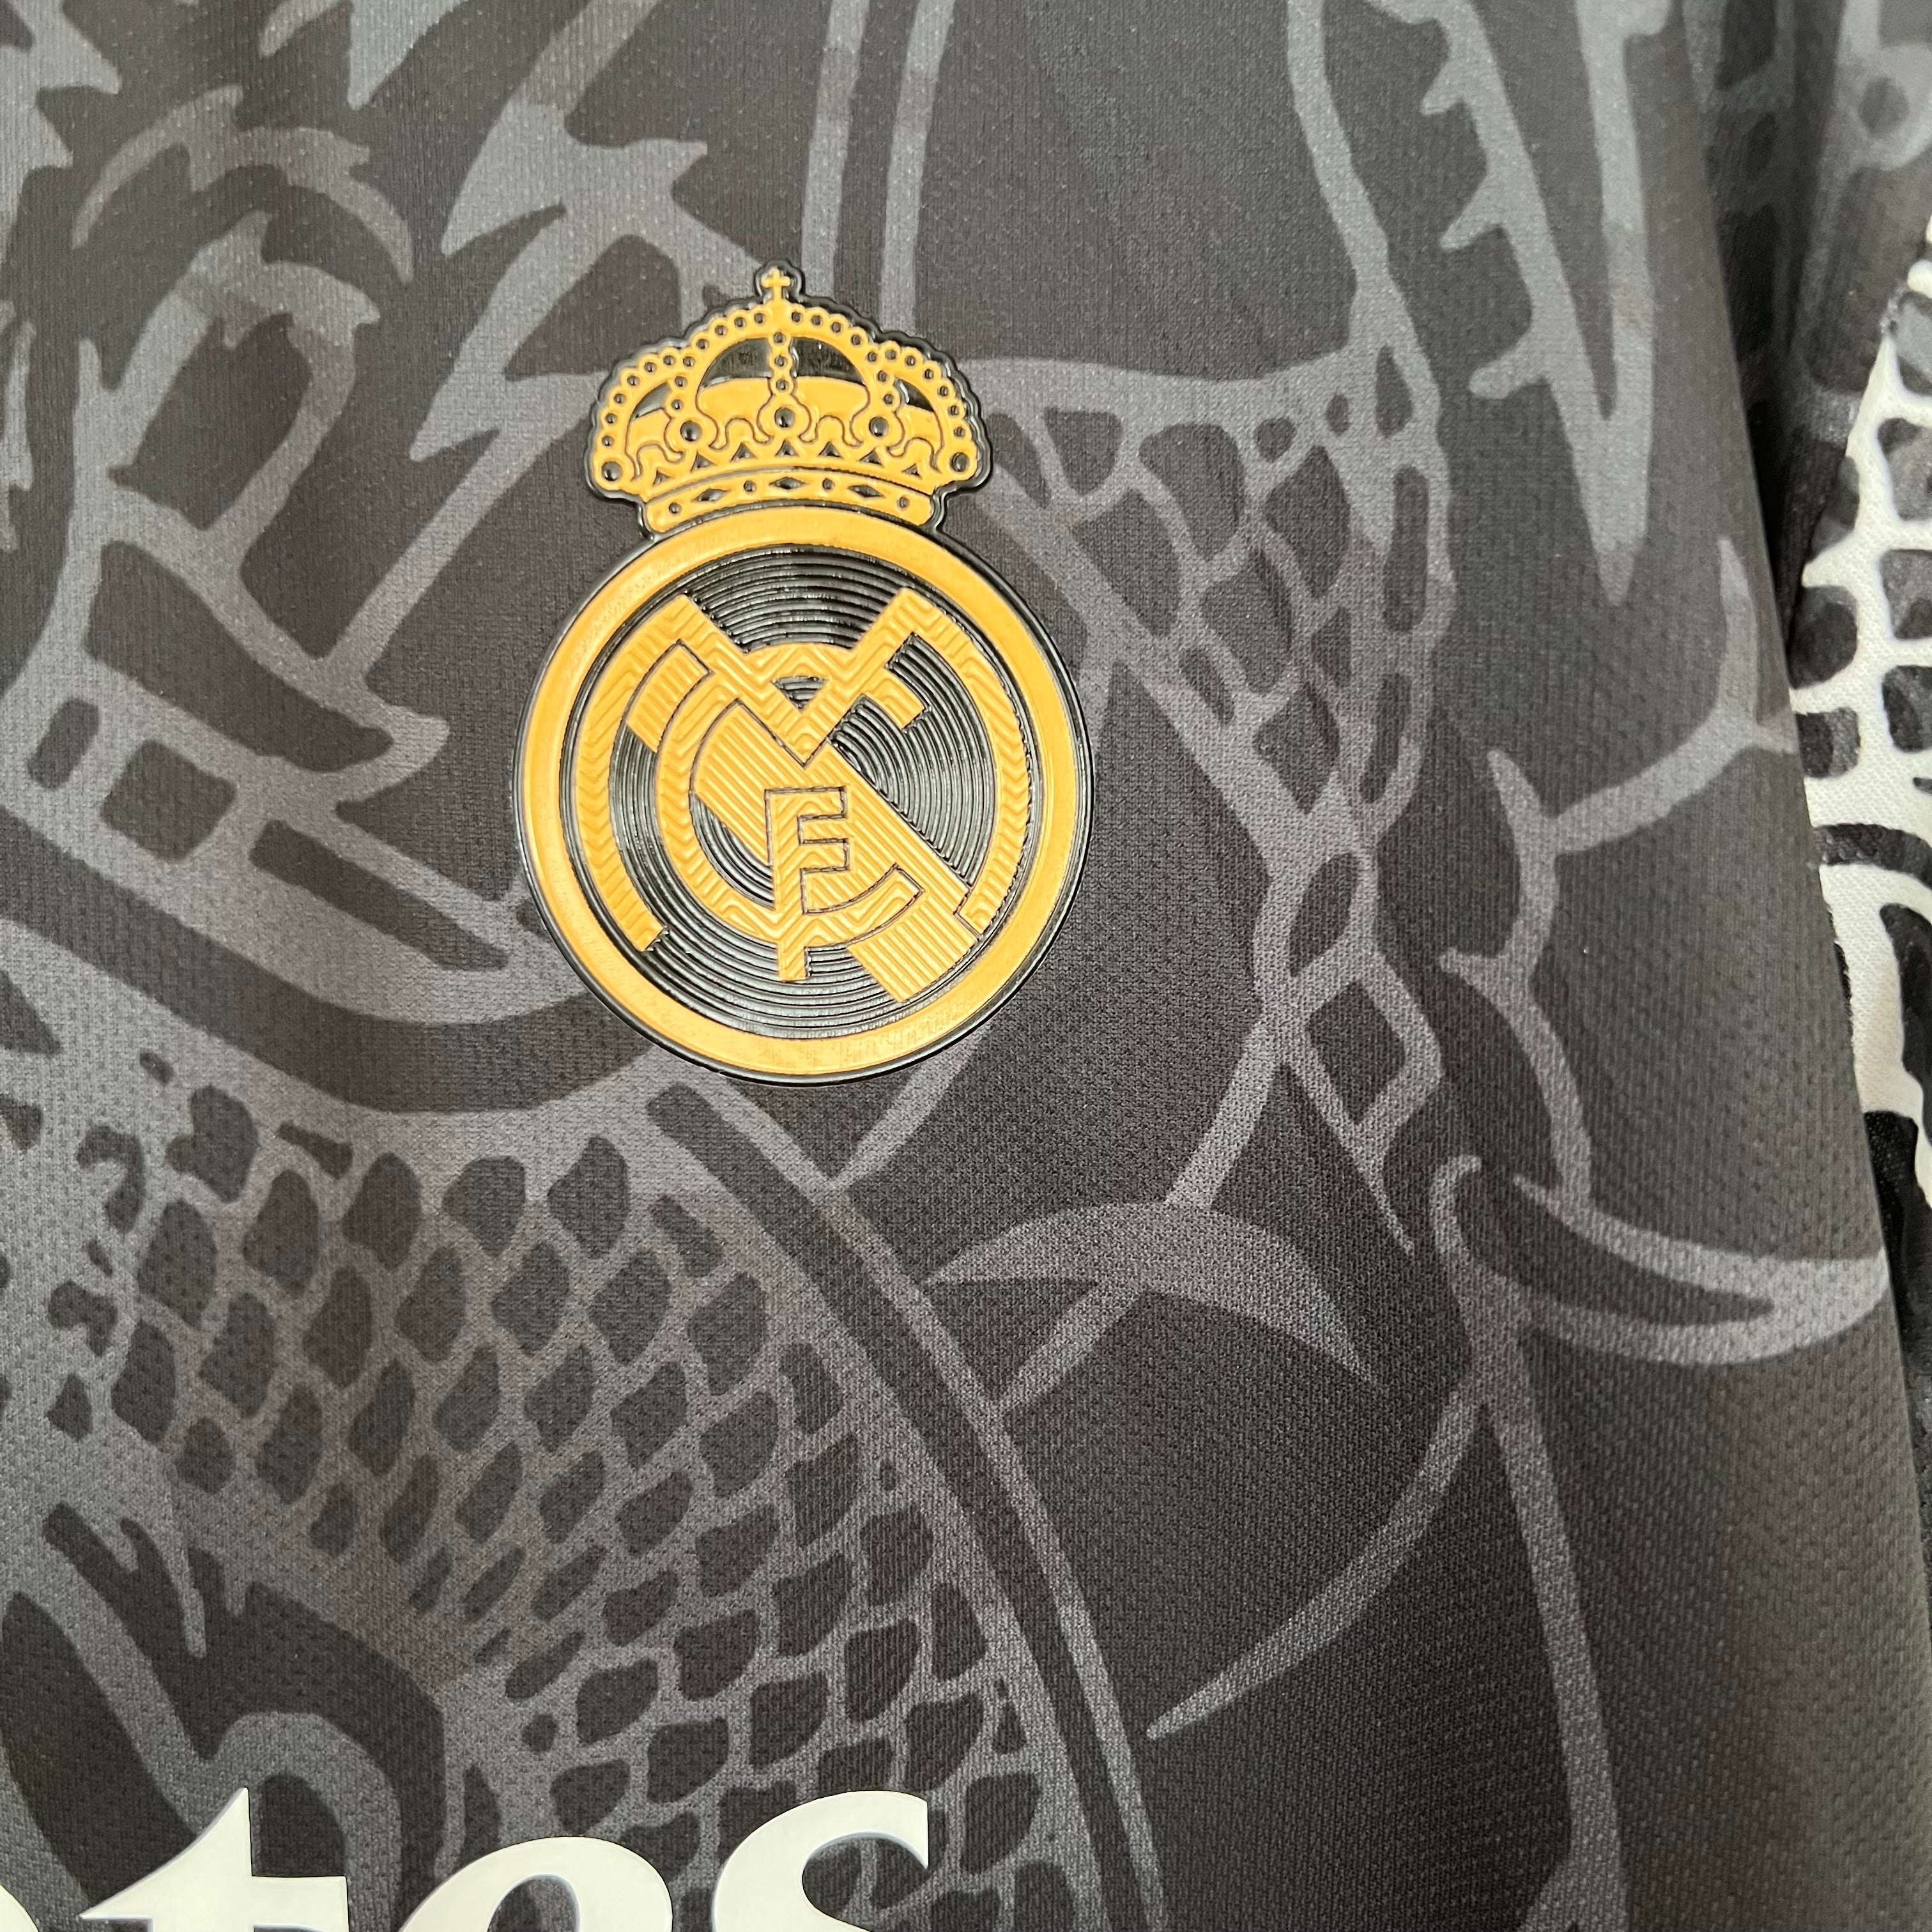 Real Madrid - Special Edition 23/24